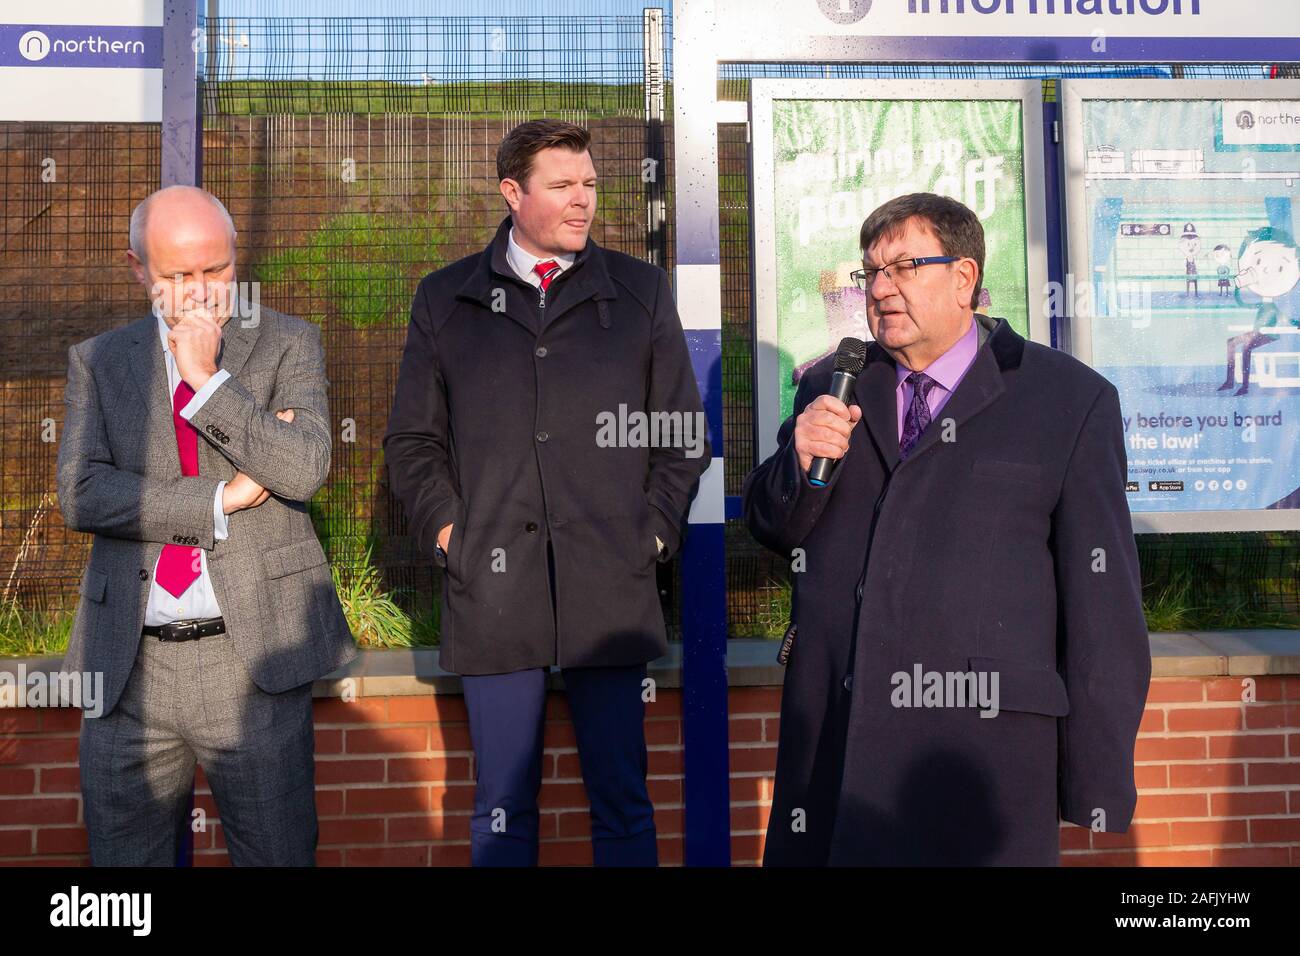 Warrington, Cheshire, UK. 16th Dec, 2019. Professor Steven Broomhead, Chief Executive of Warrington Borough Council, with Russ Bowden, Leader of the council and Thomas Edgcumbe, Managing Director (UKCS North and Midlands) at Balfour Beatty plc, addresses the guests at the official opening of Warrington West Railway Station on 16 December 2019 Credit: John Hopkins/Alamy Live News Stock Photo